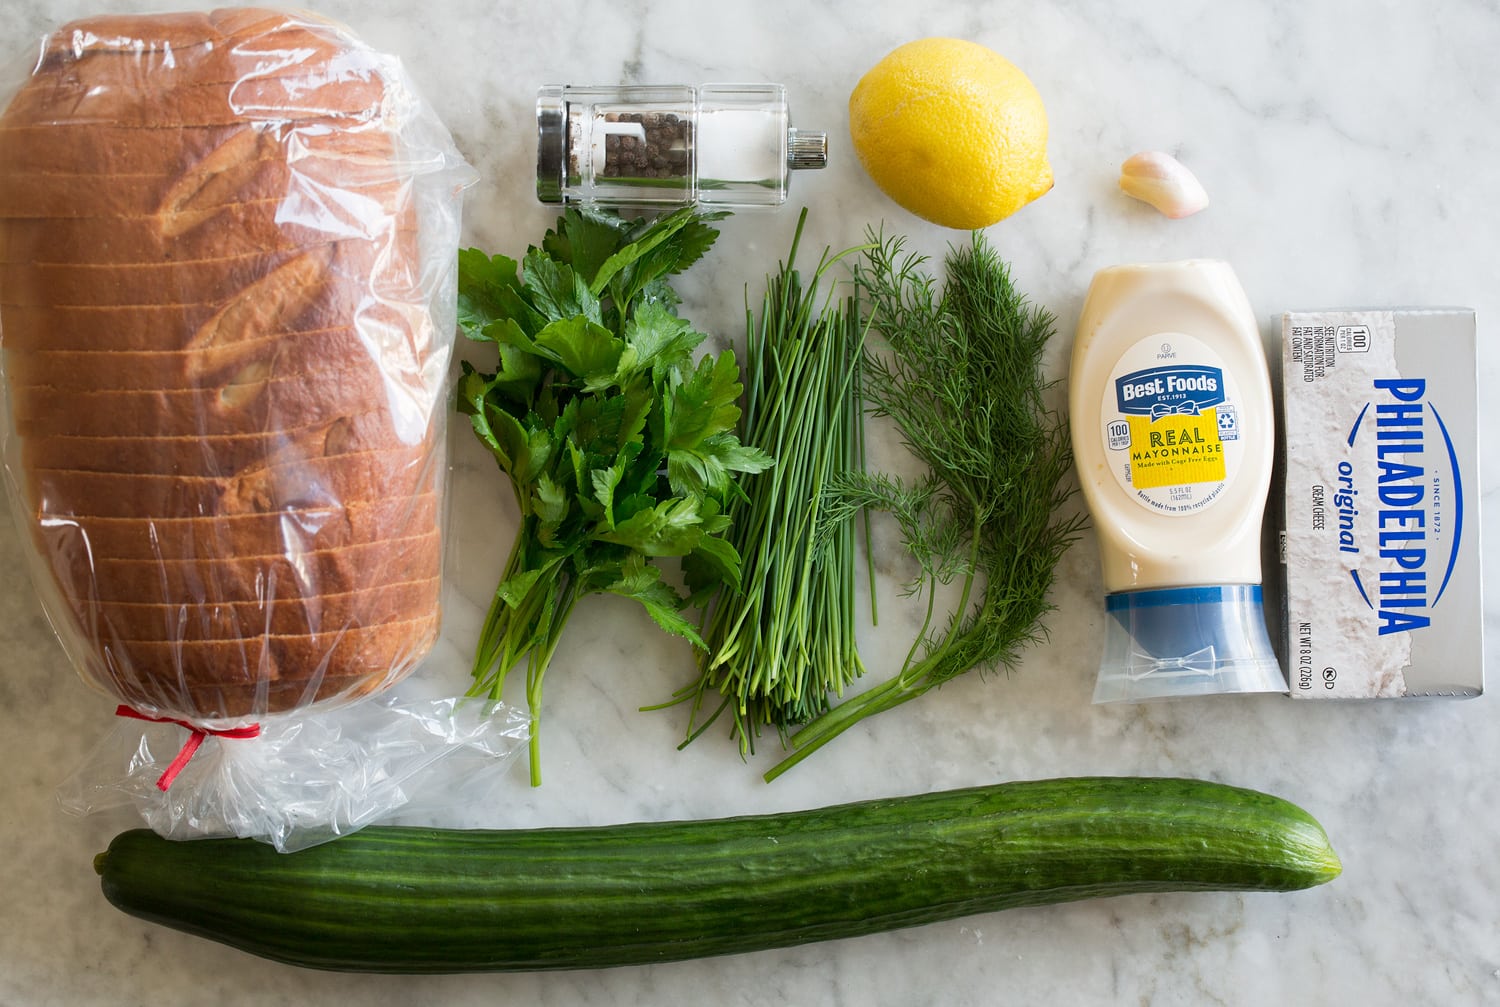 Ingredients used to make cucumber sandwiches.